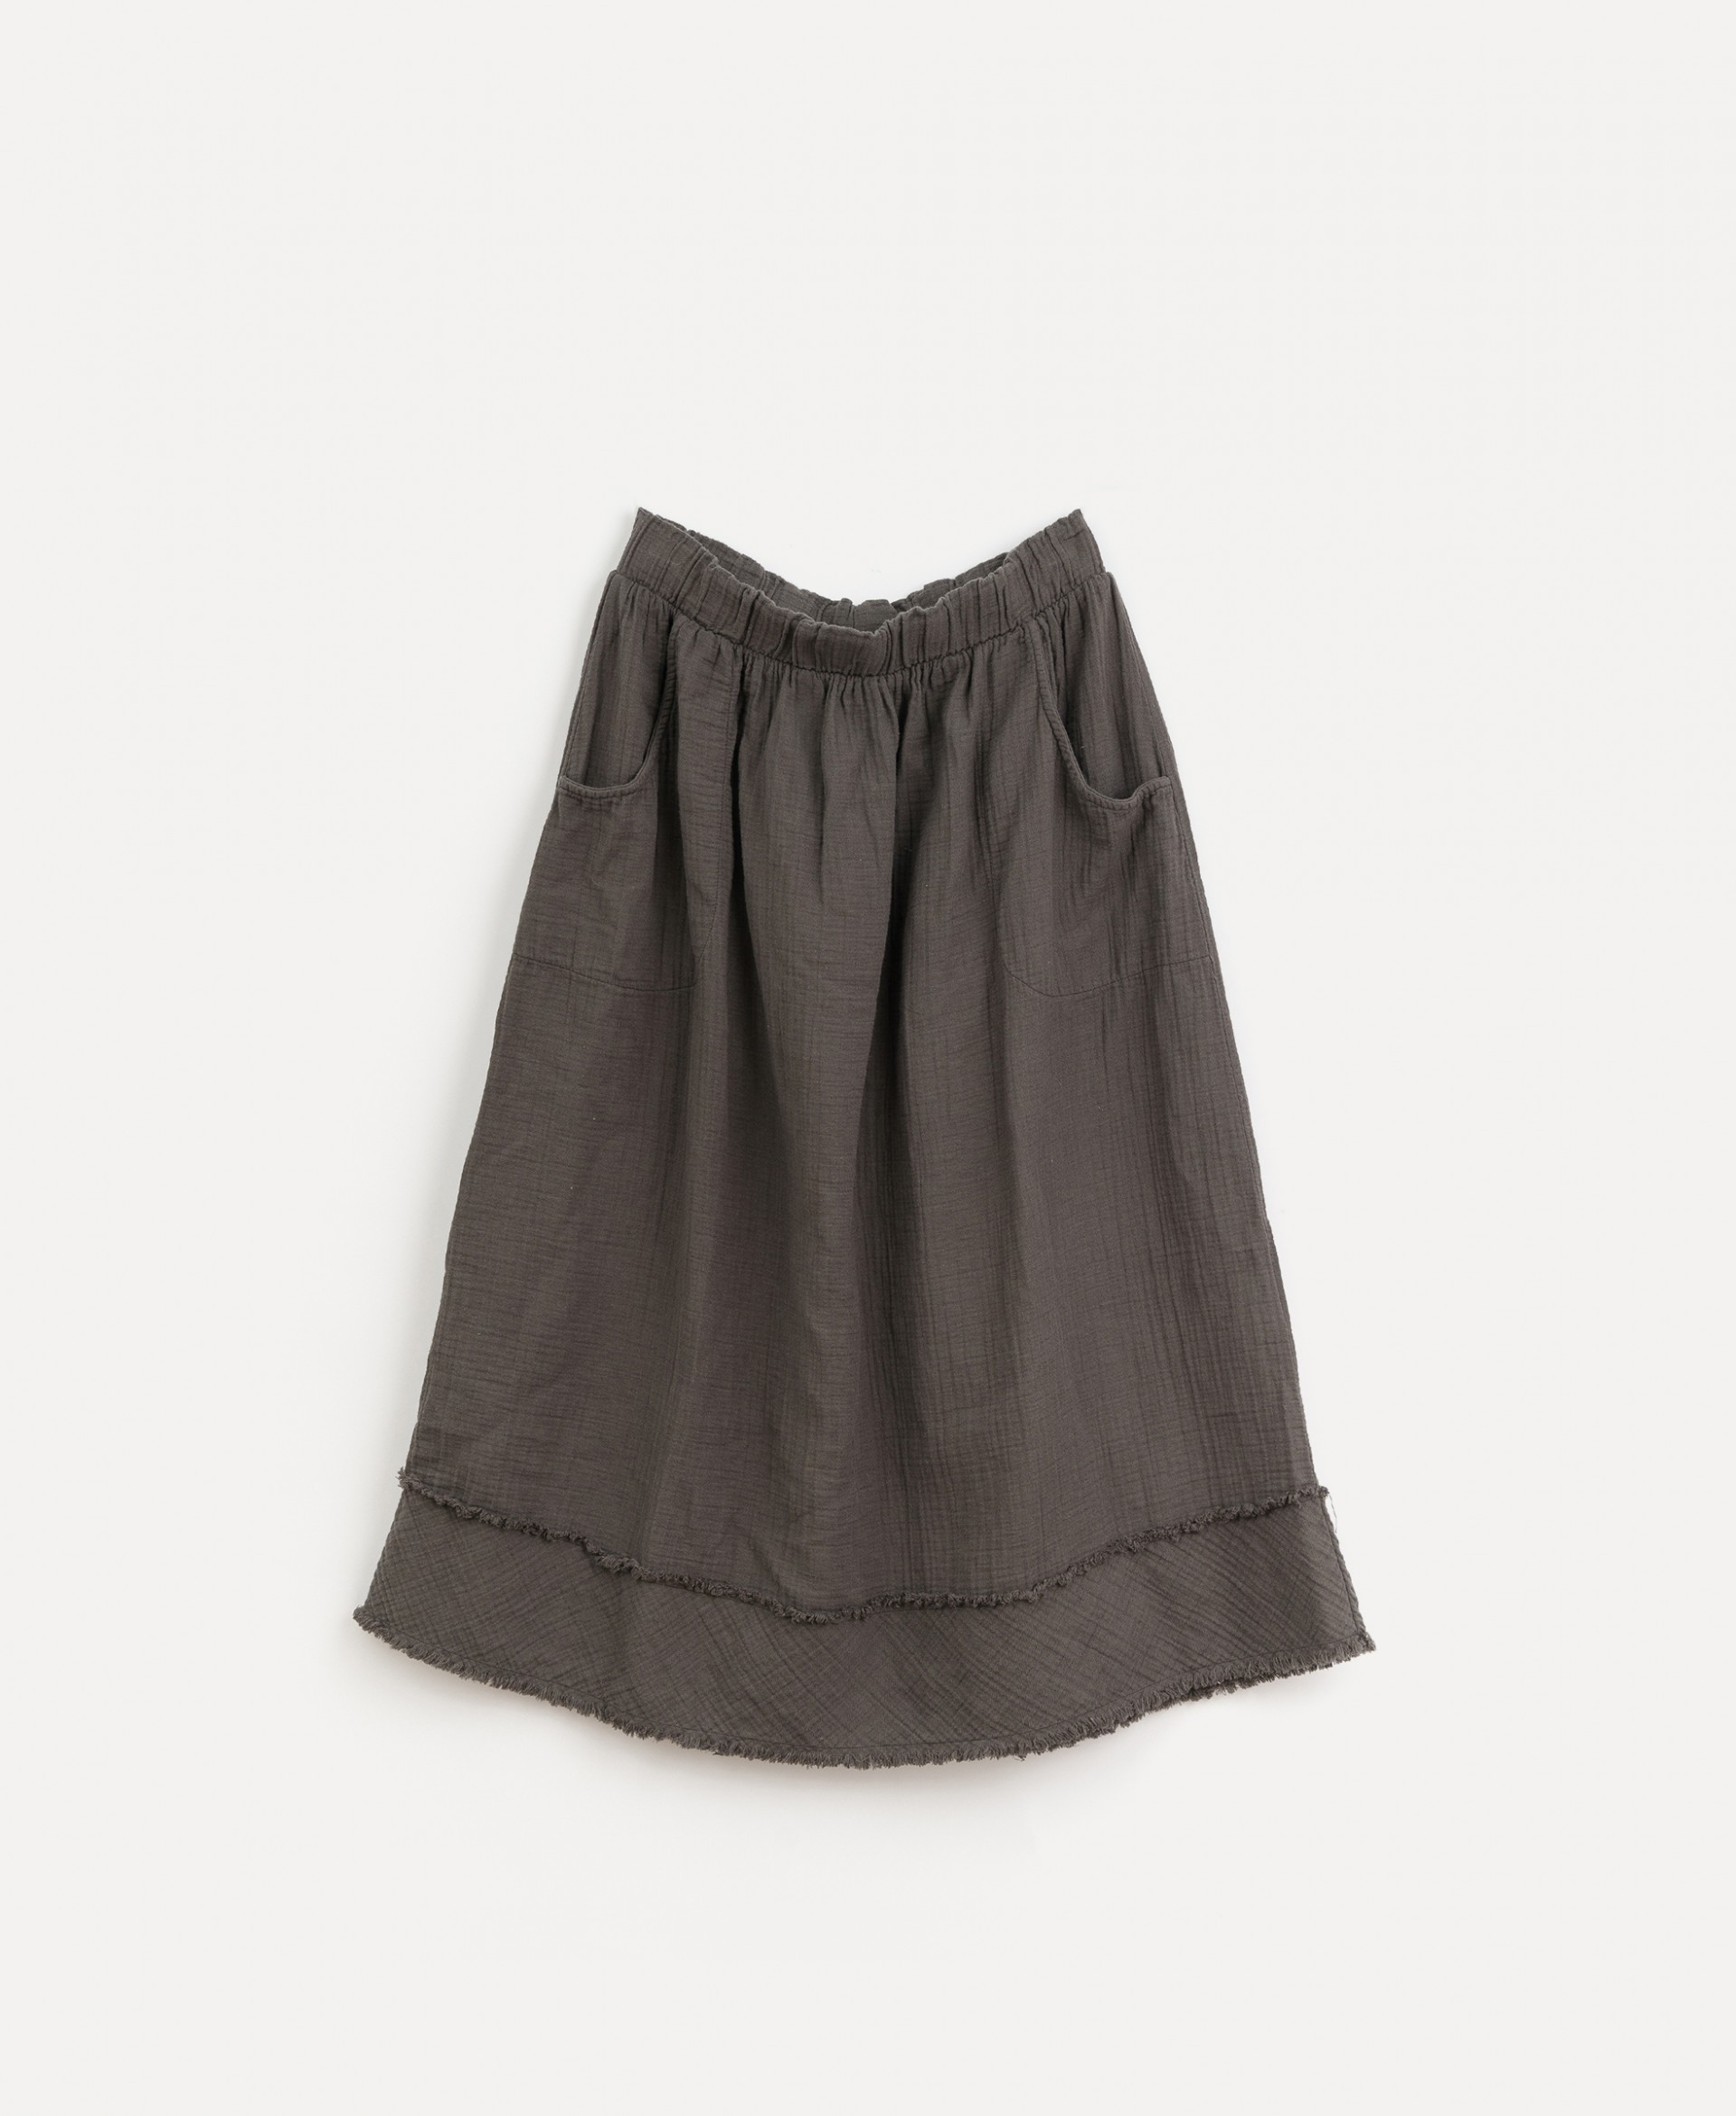 Skirt with pockets | Culinary